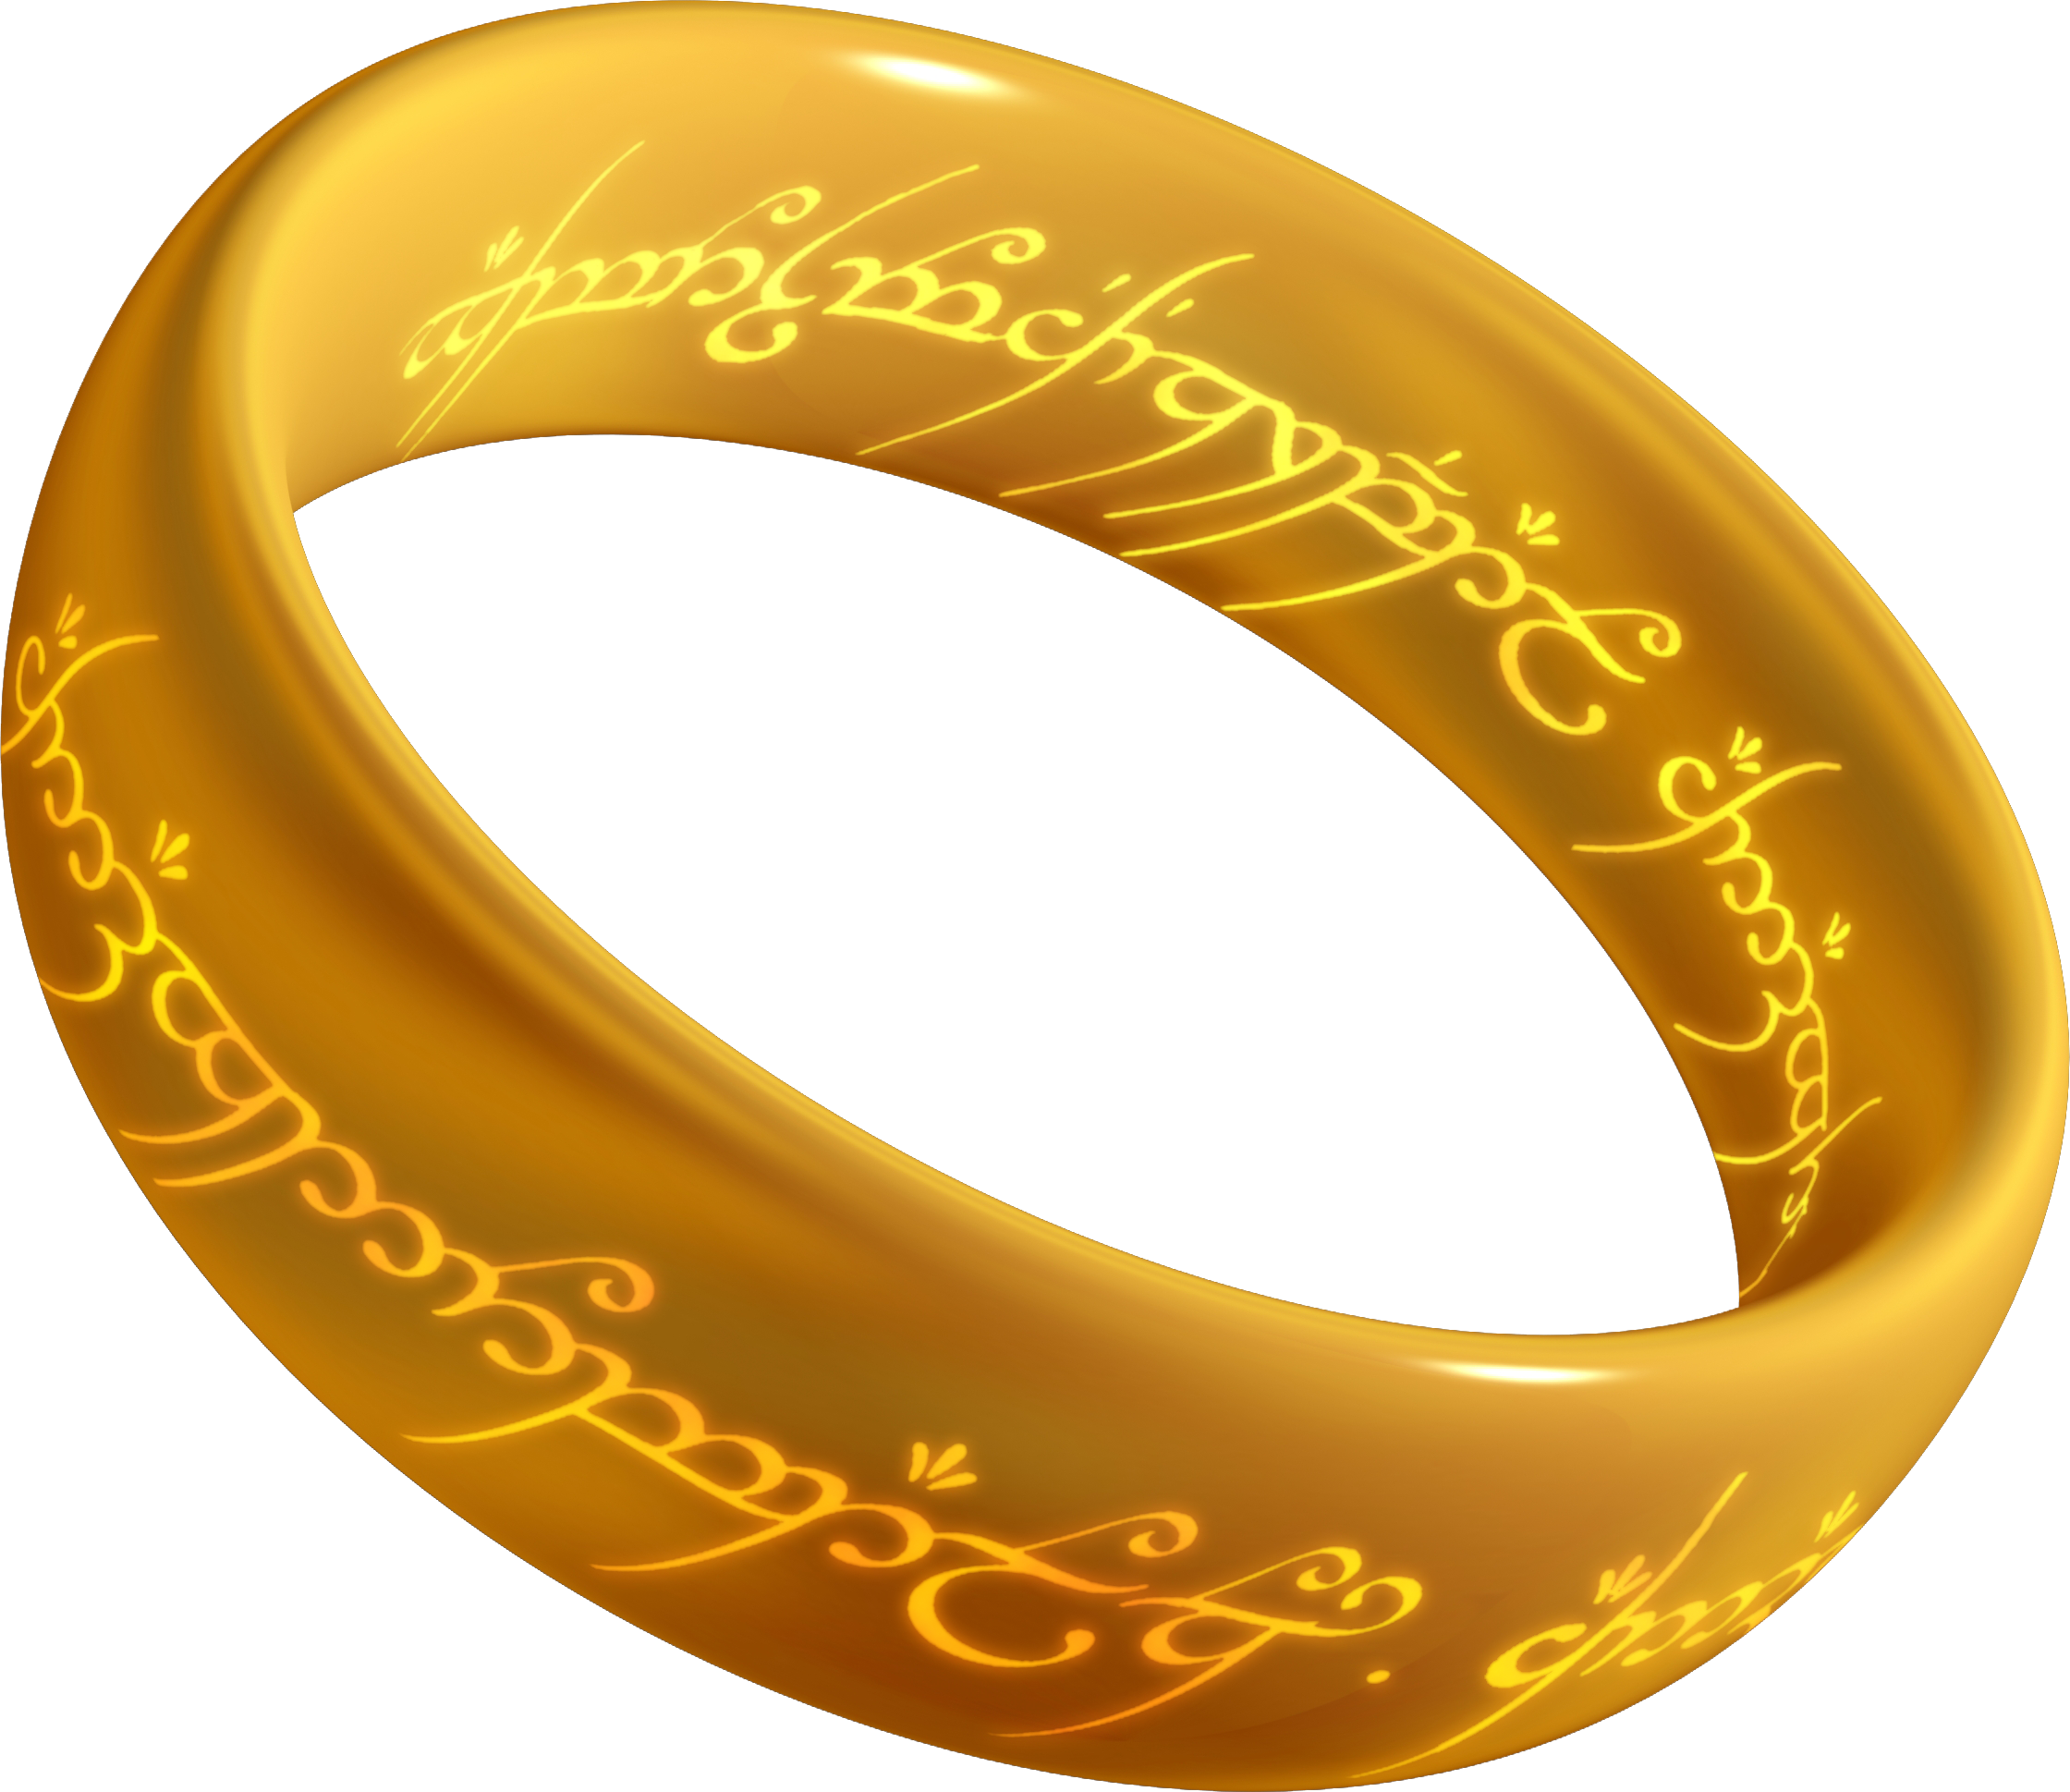 One Ring Render.png